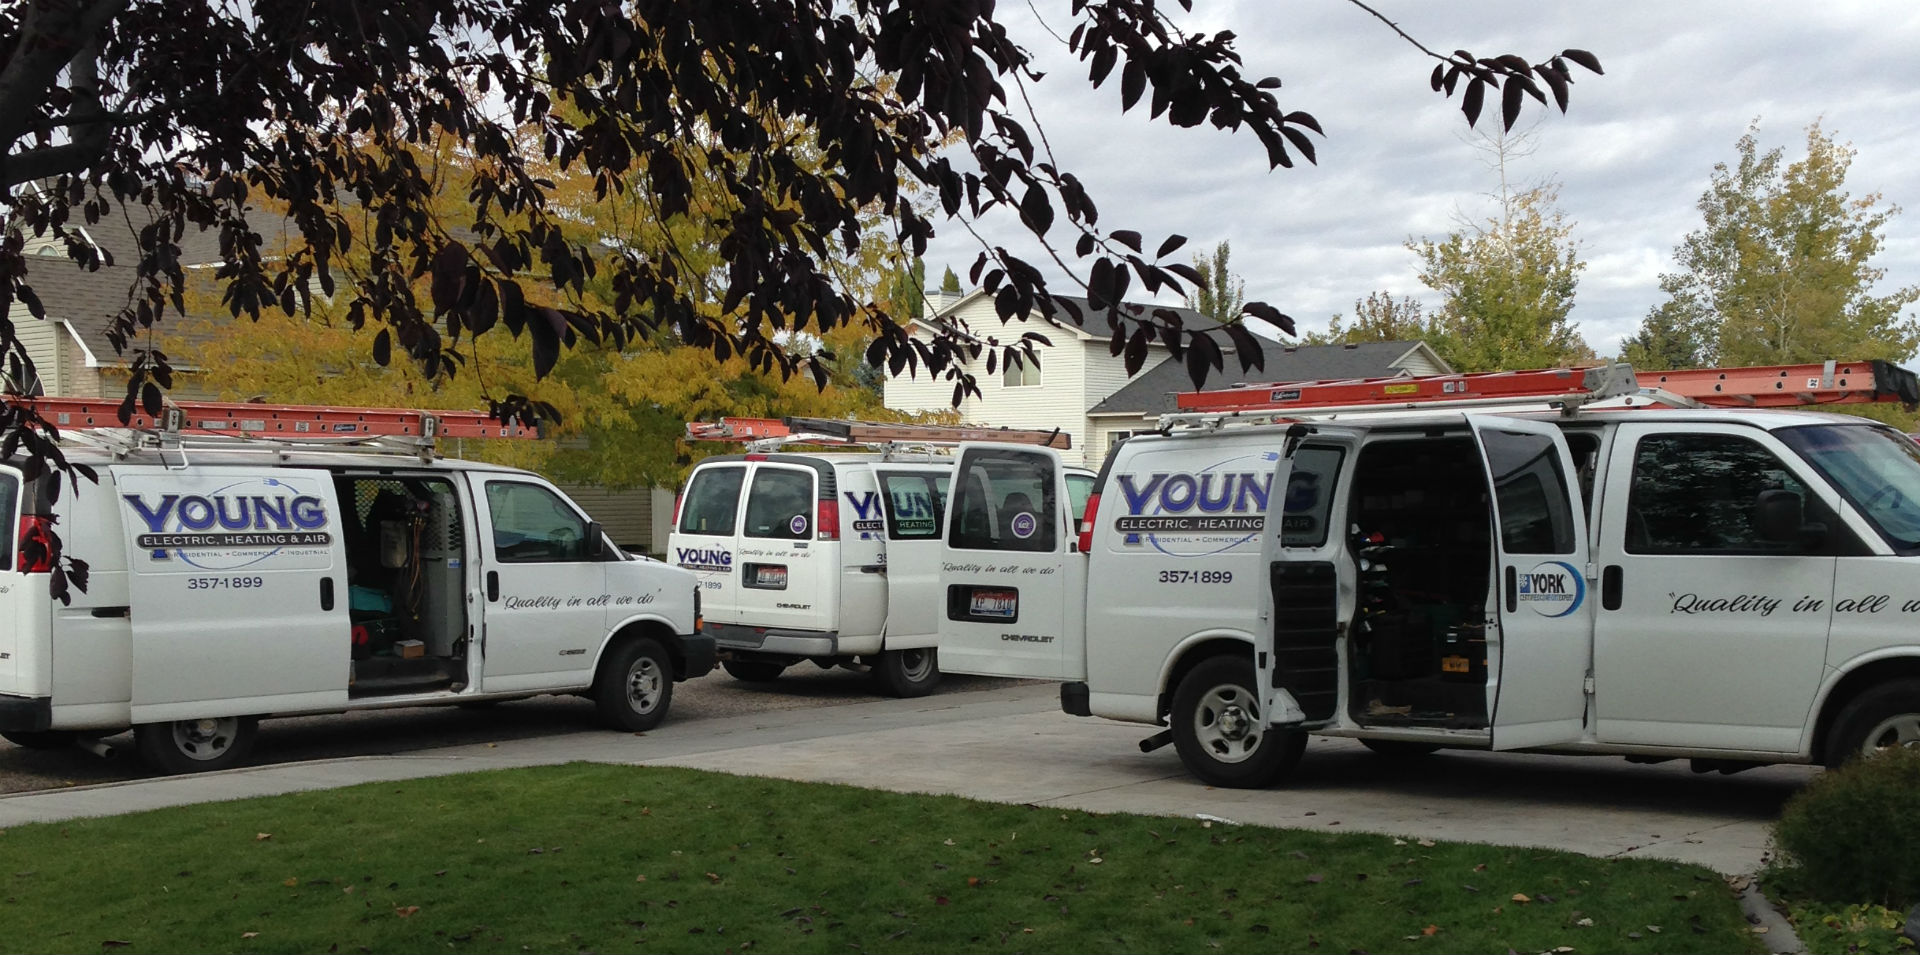 Young Electric, Heating & Air Photo